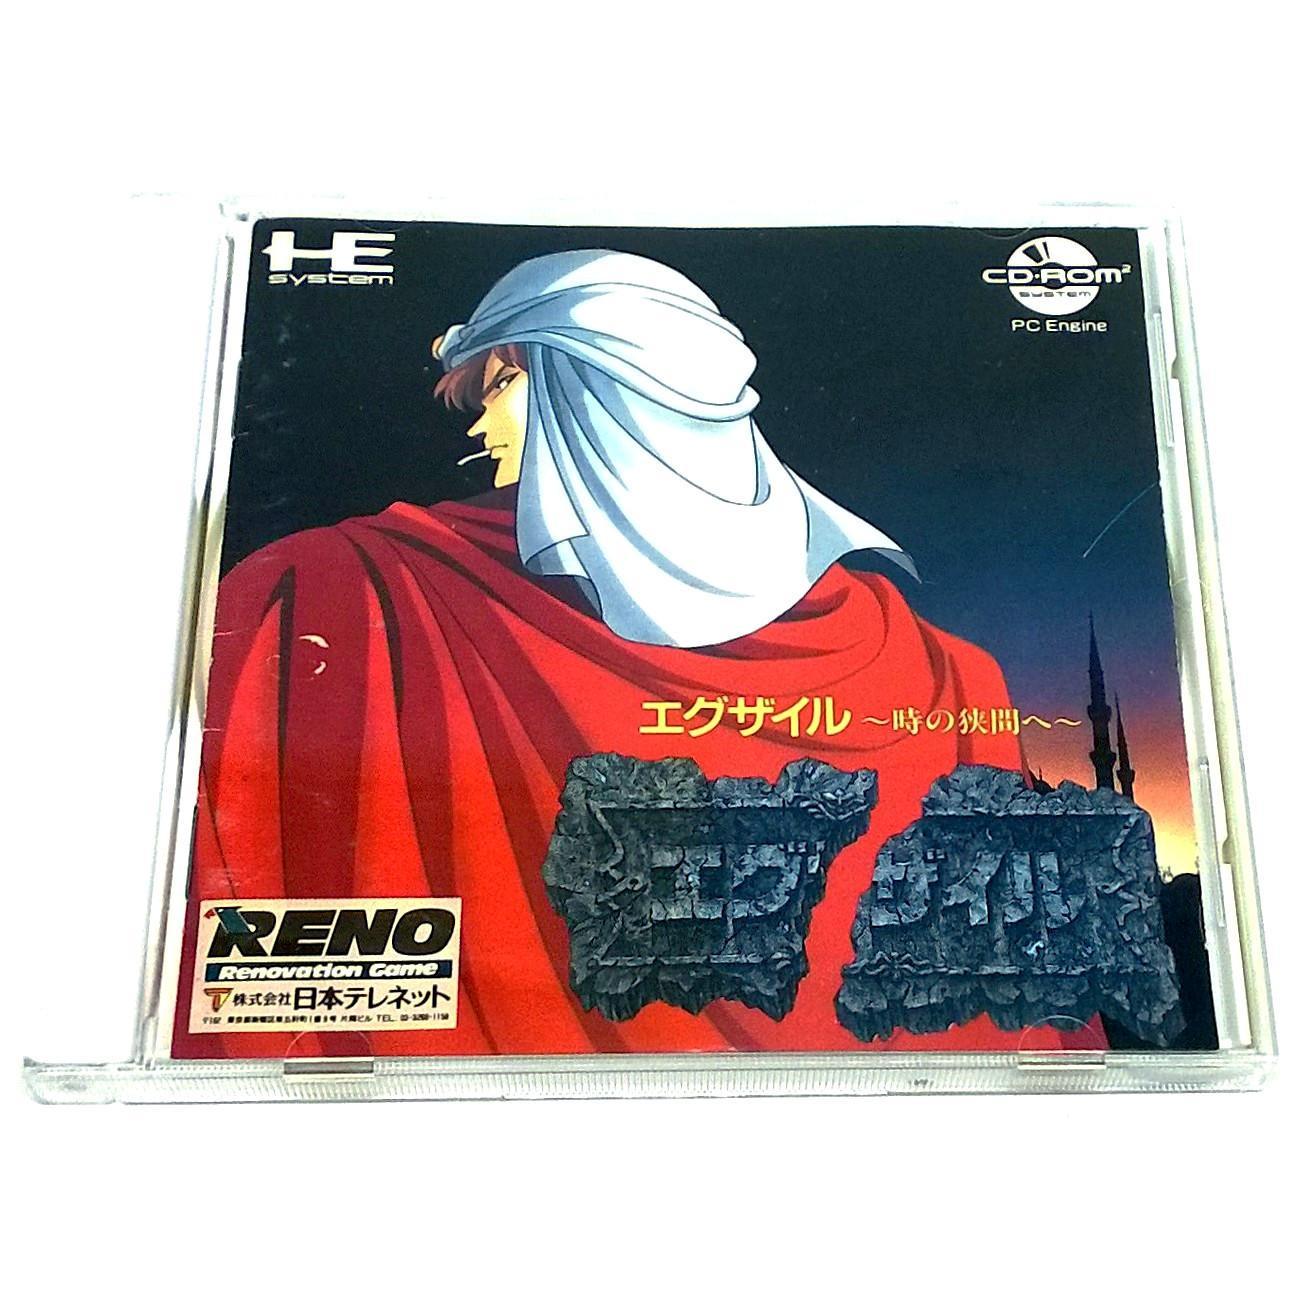 Exile for PC Engine - Front of case